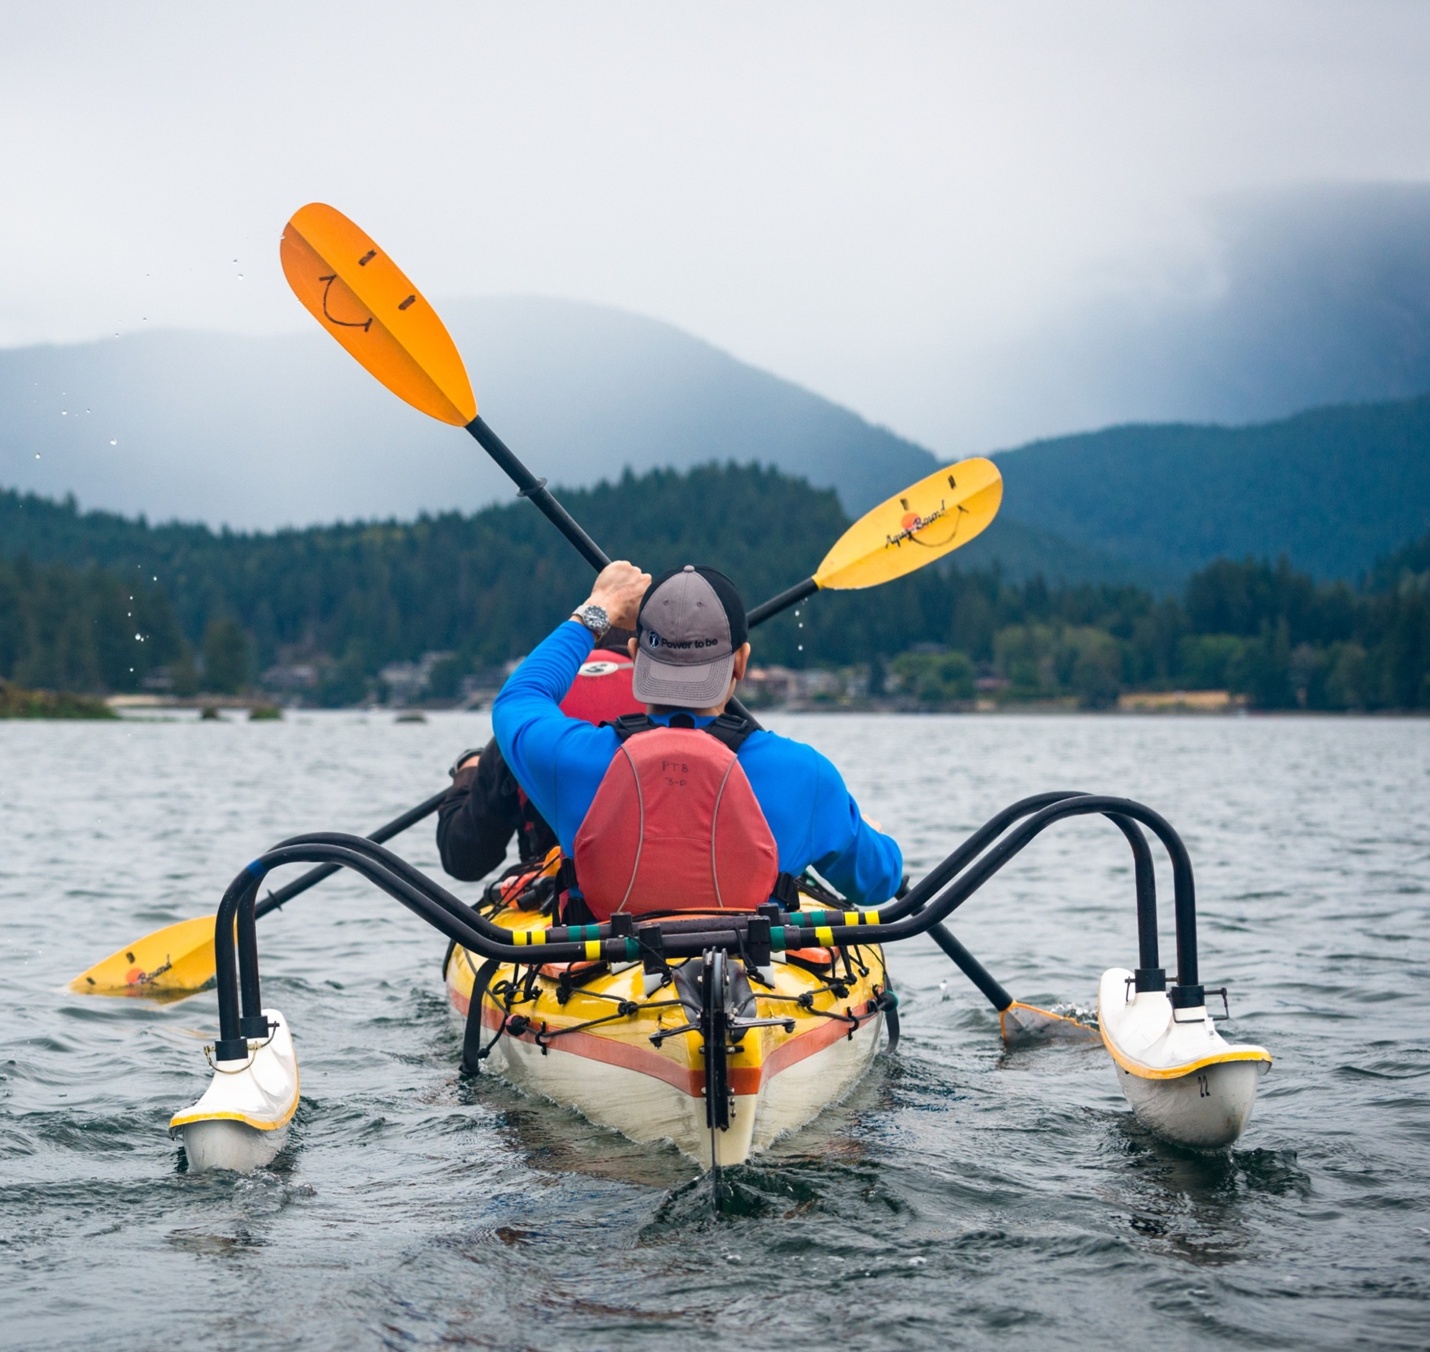 Two people in a kayak facing a mountain in the distance. The kayak has stabilizing pontoons.